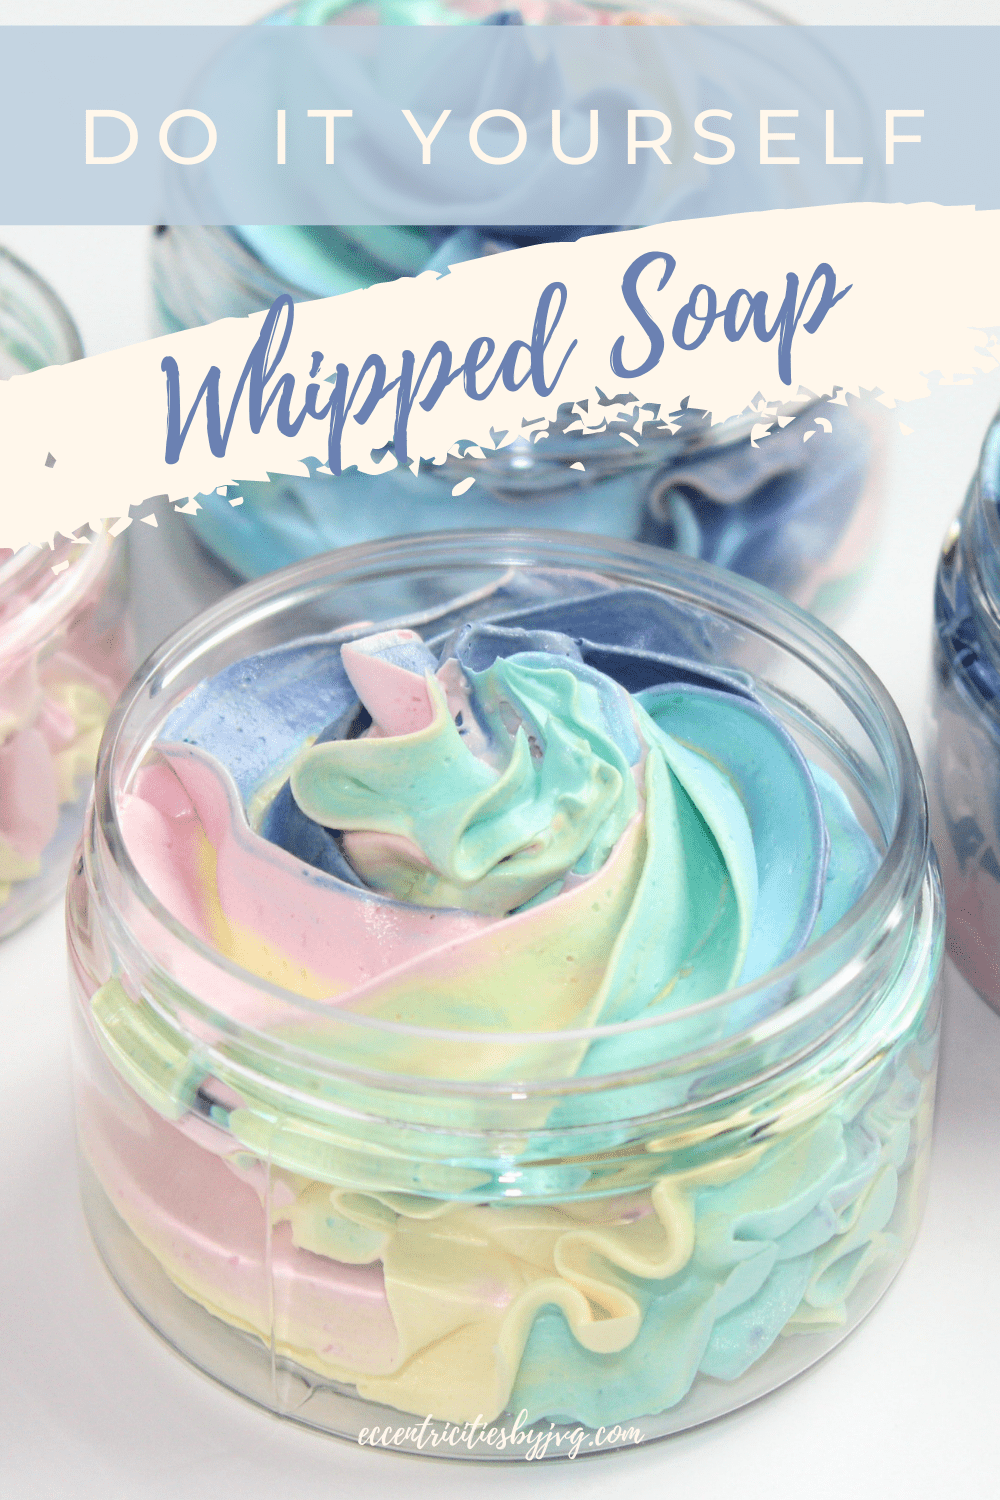 Whipped Cream Soap Formulation